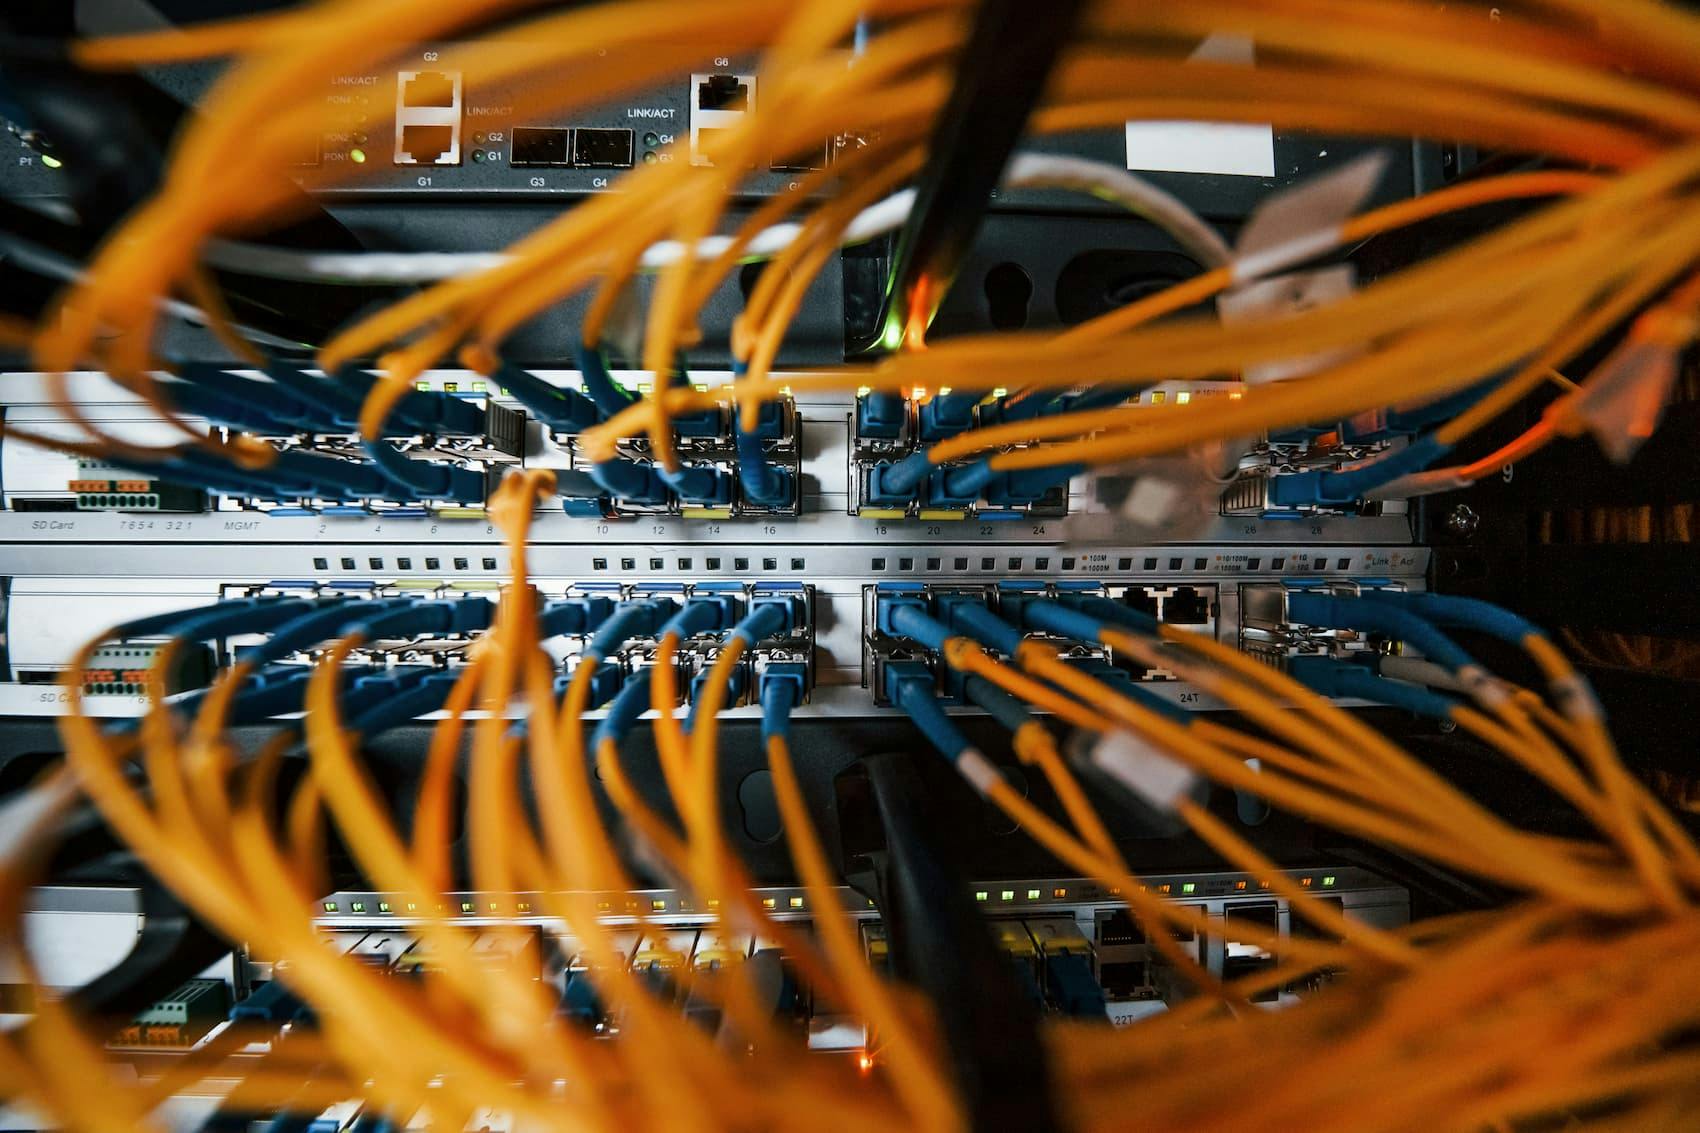 Network switch and fibre optic cables providing the backbone for VPS hosting services.